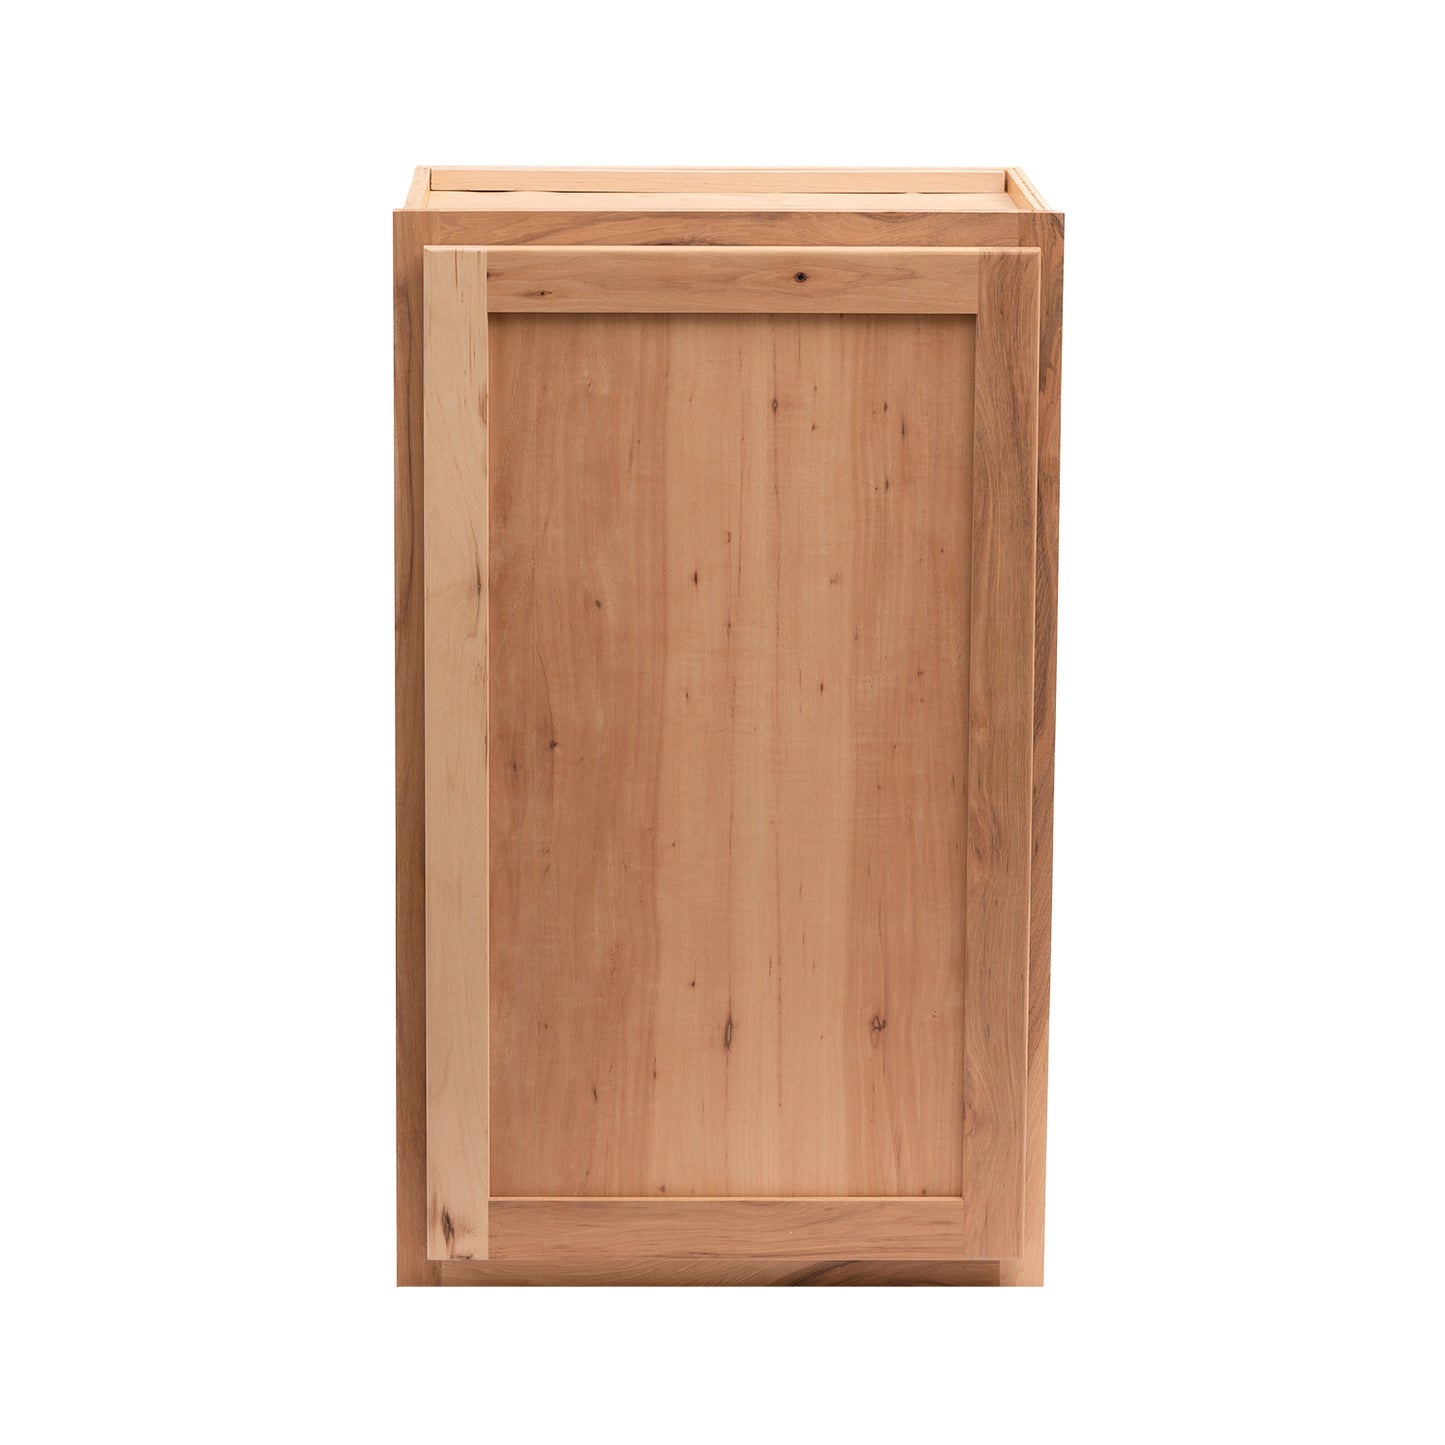 Quicklock RTA - Winding River Collection - Raw Hickory 24"Wx30"Hx12"D Wall cabinet